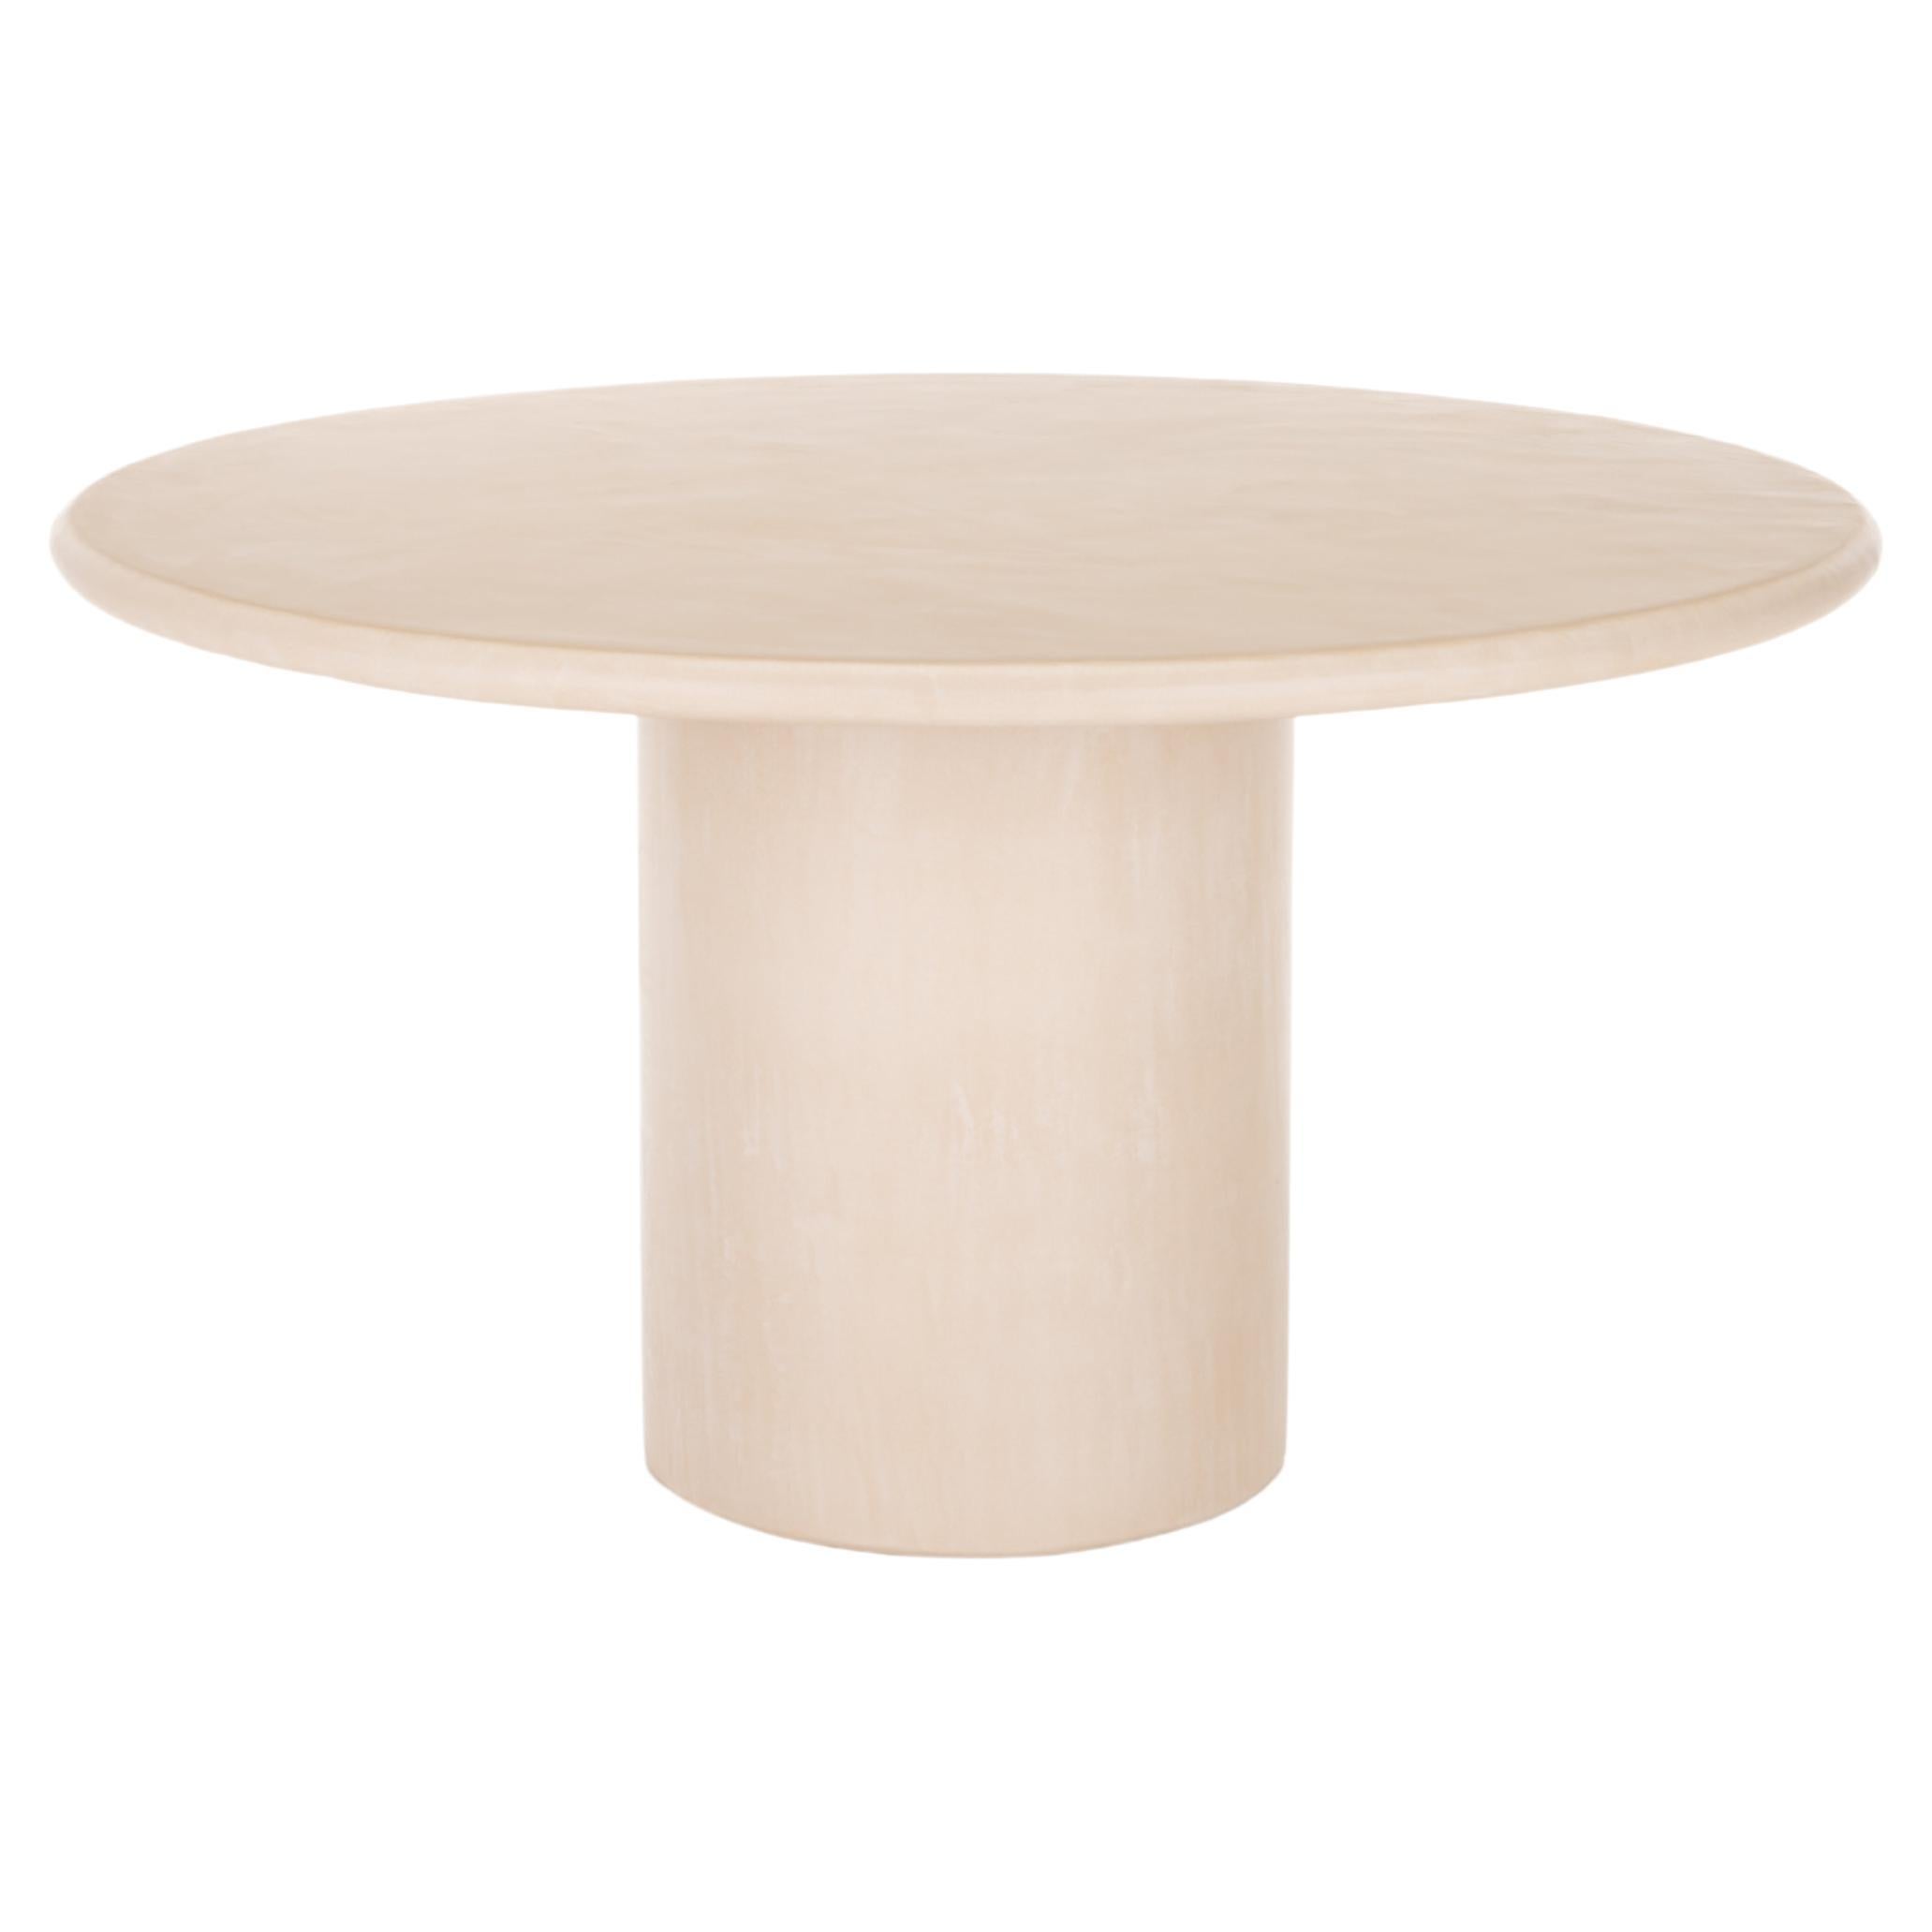 Contemporary Round Natural Plaster "Column" Table 120cm by Isabelle Beaumont